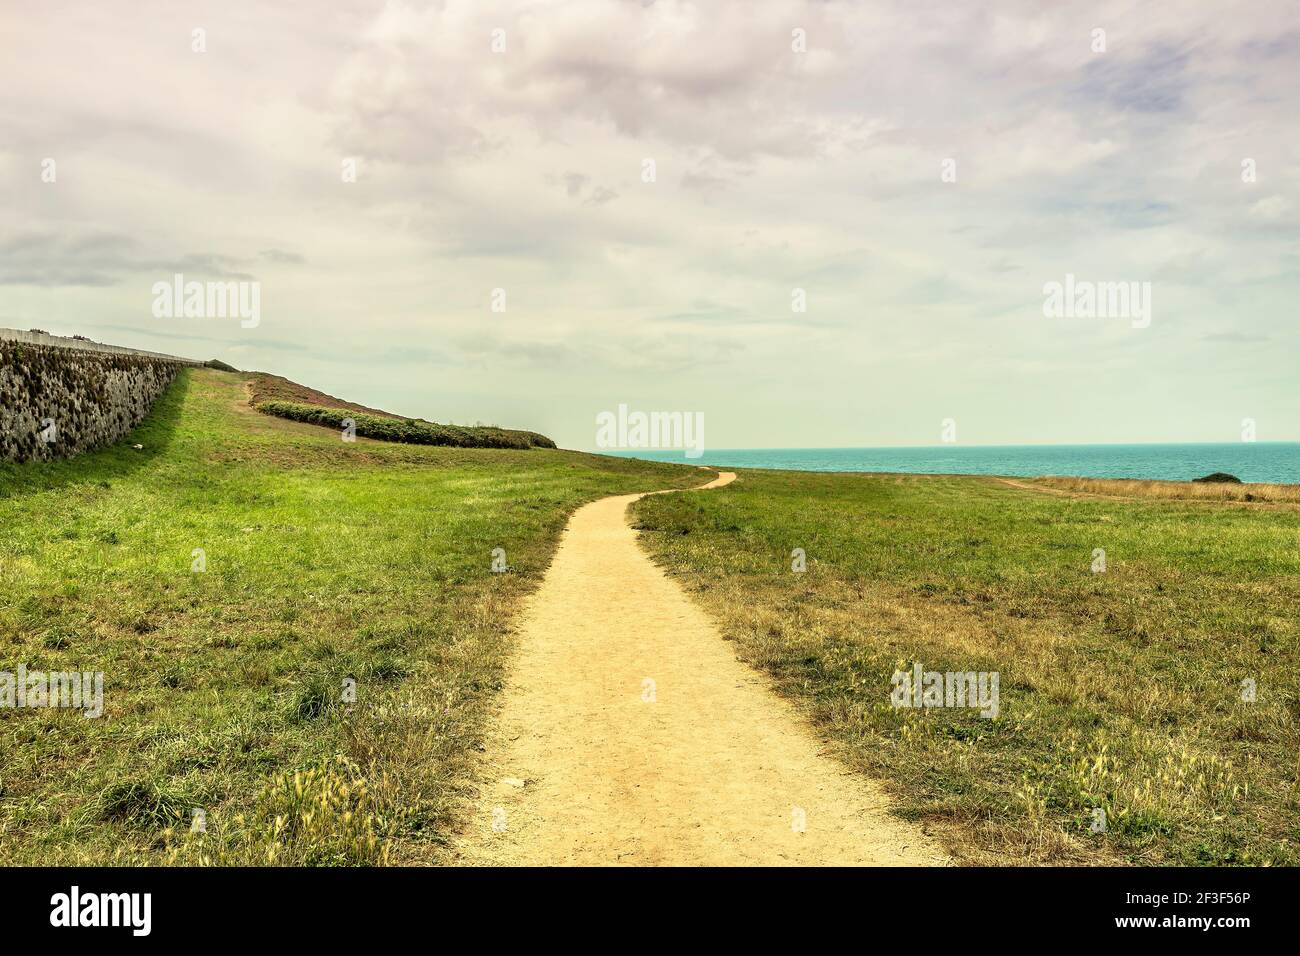 scenery with a winding dirt road heading towards the sea Stock Photo